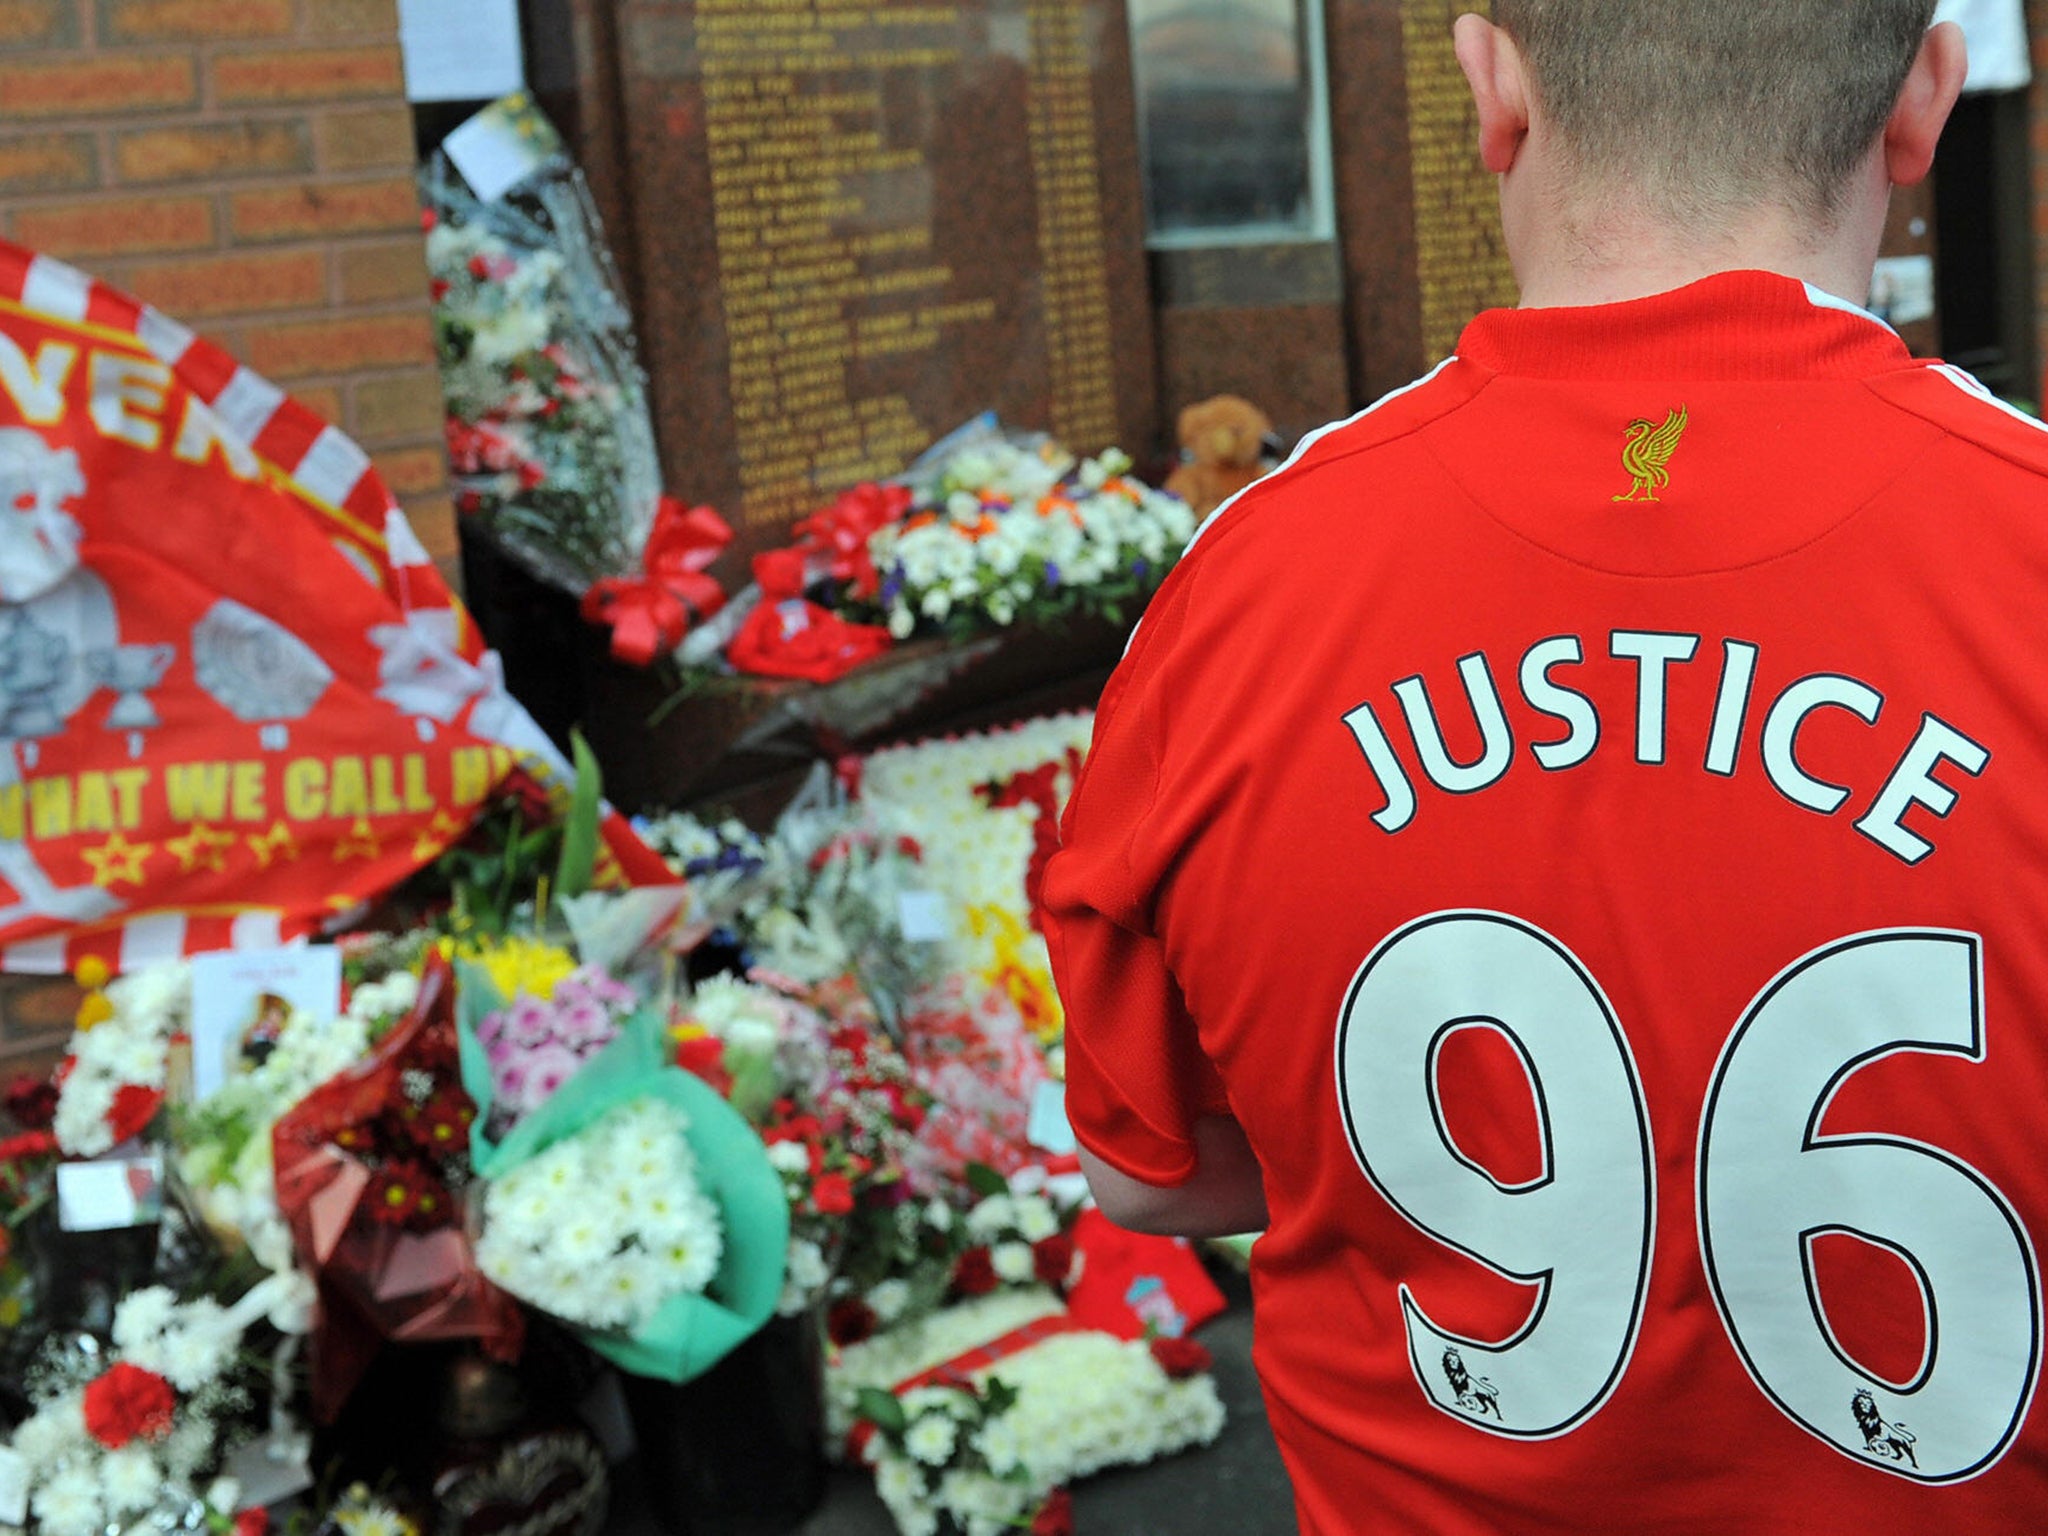 Taylor's comment have provoked anger from supporters of the Justice for the 96 campaign